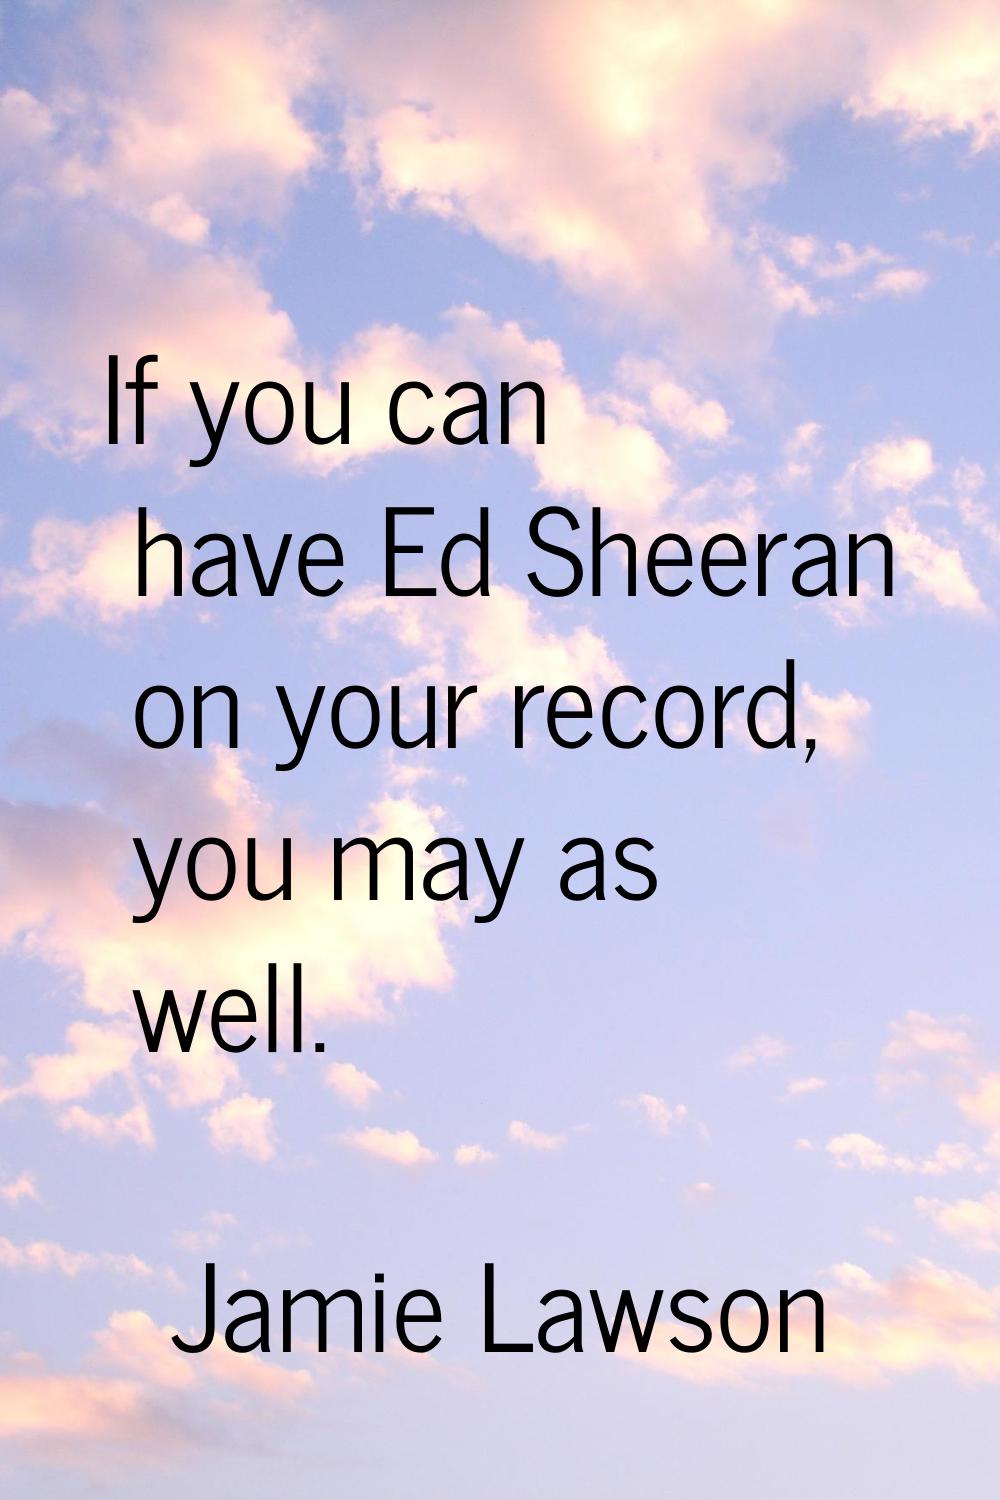 If you can have Ed Sheeran on your record, you may as well.